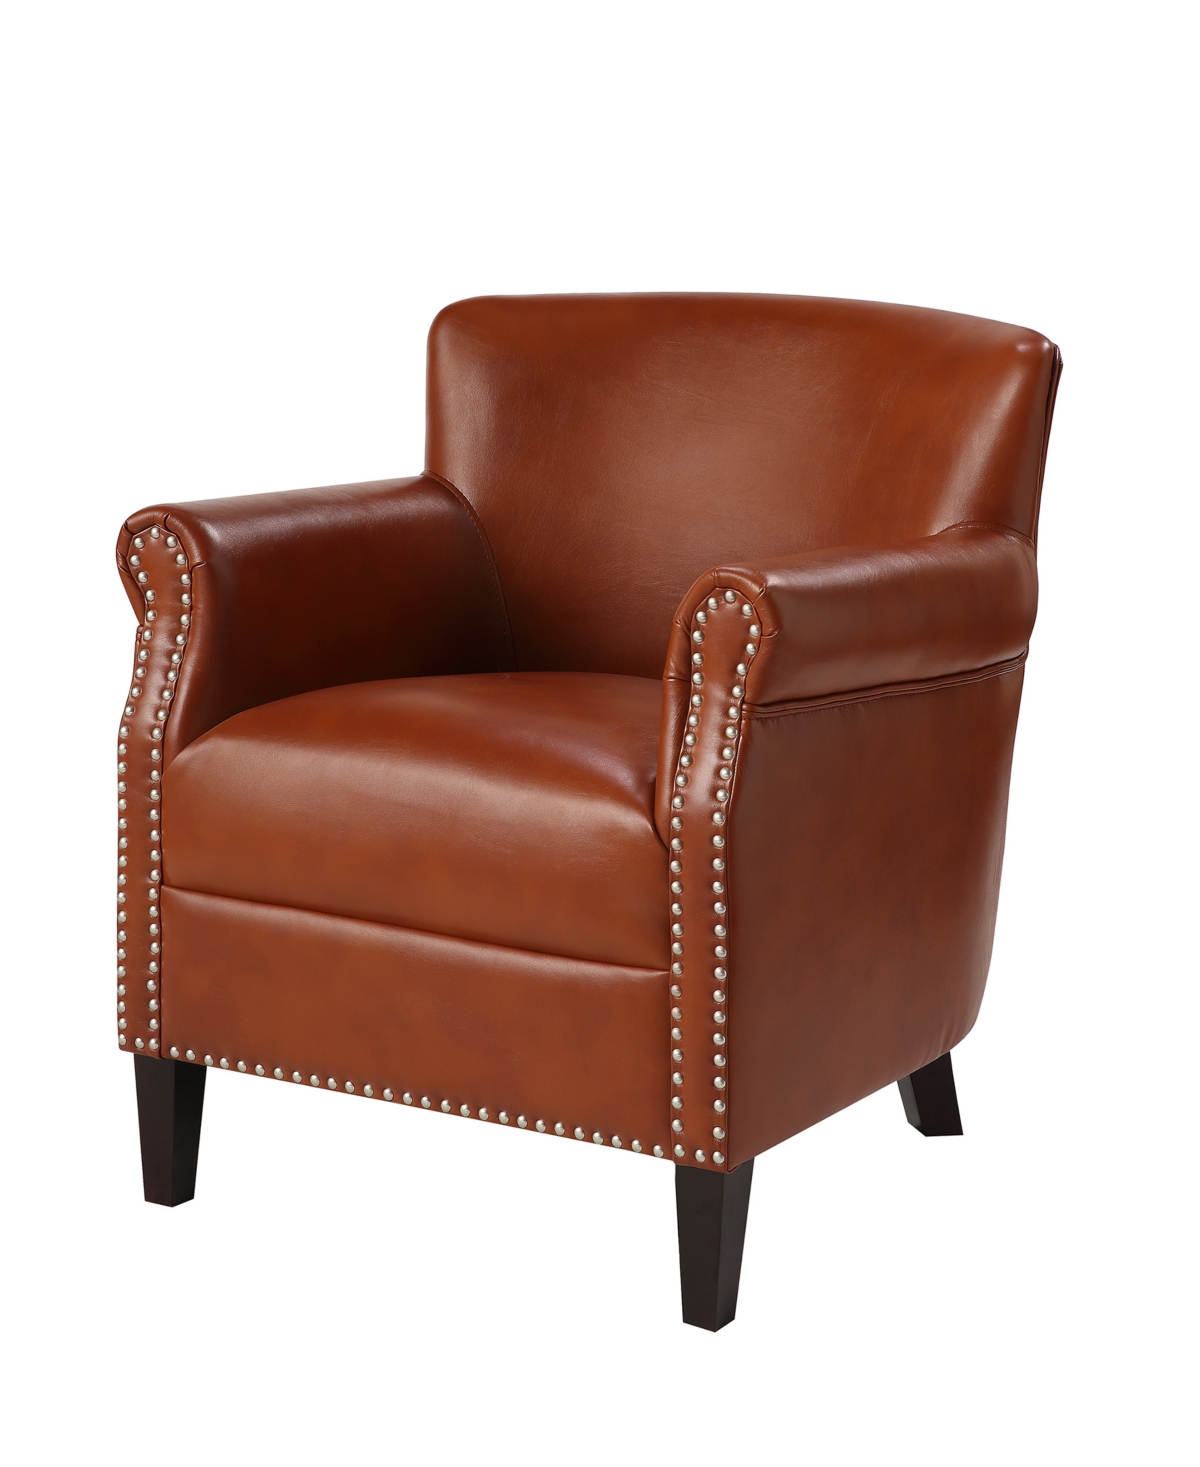 Comfort Pointe Holly Club Chair In Rust